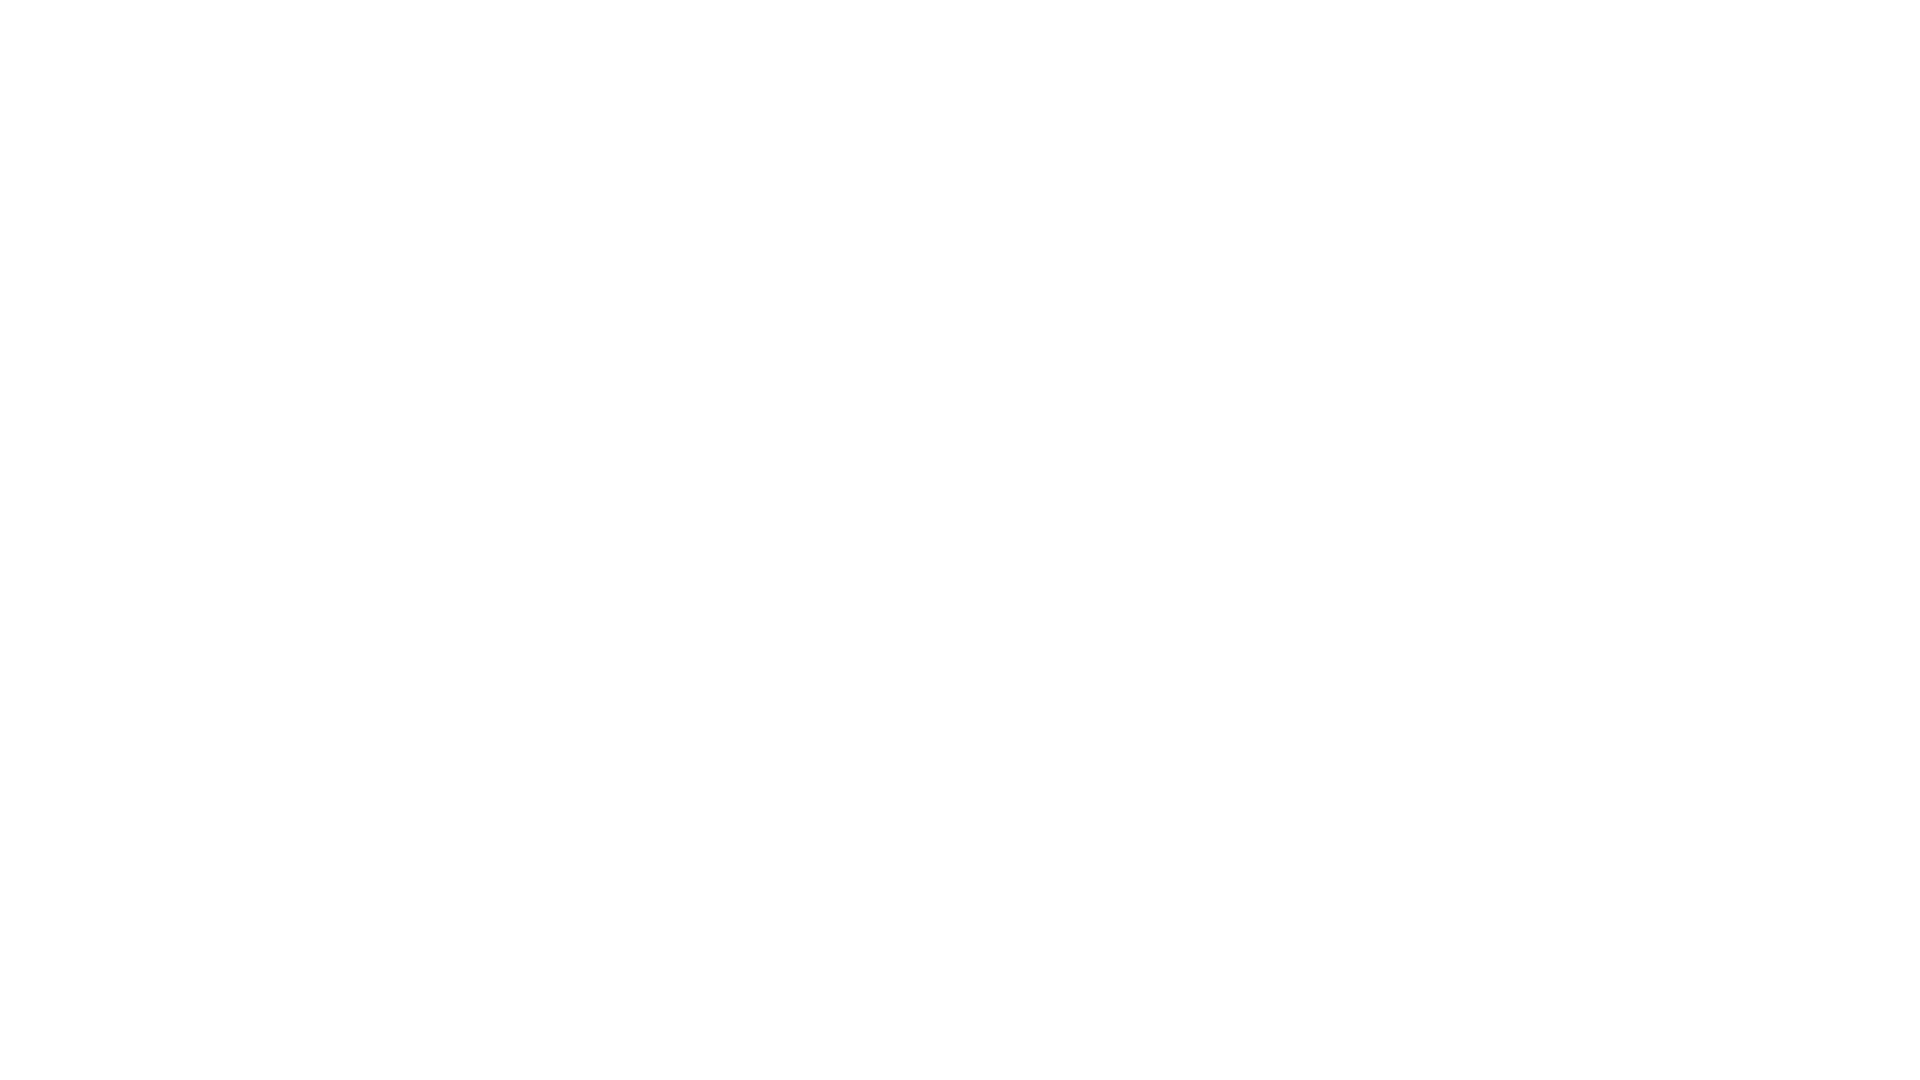 Boys In the Band – Alabama Tribute